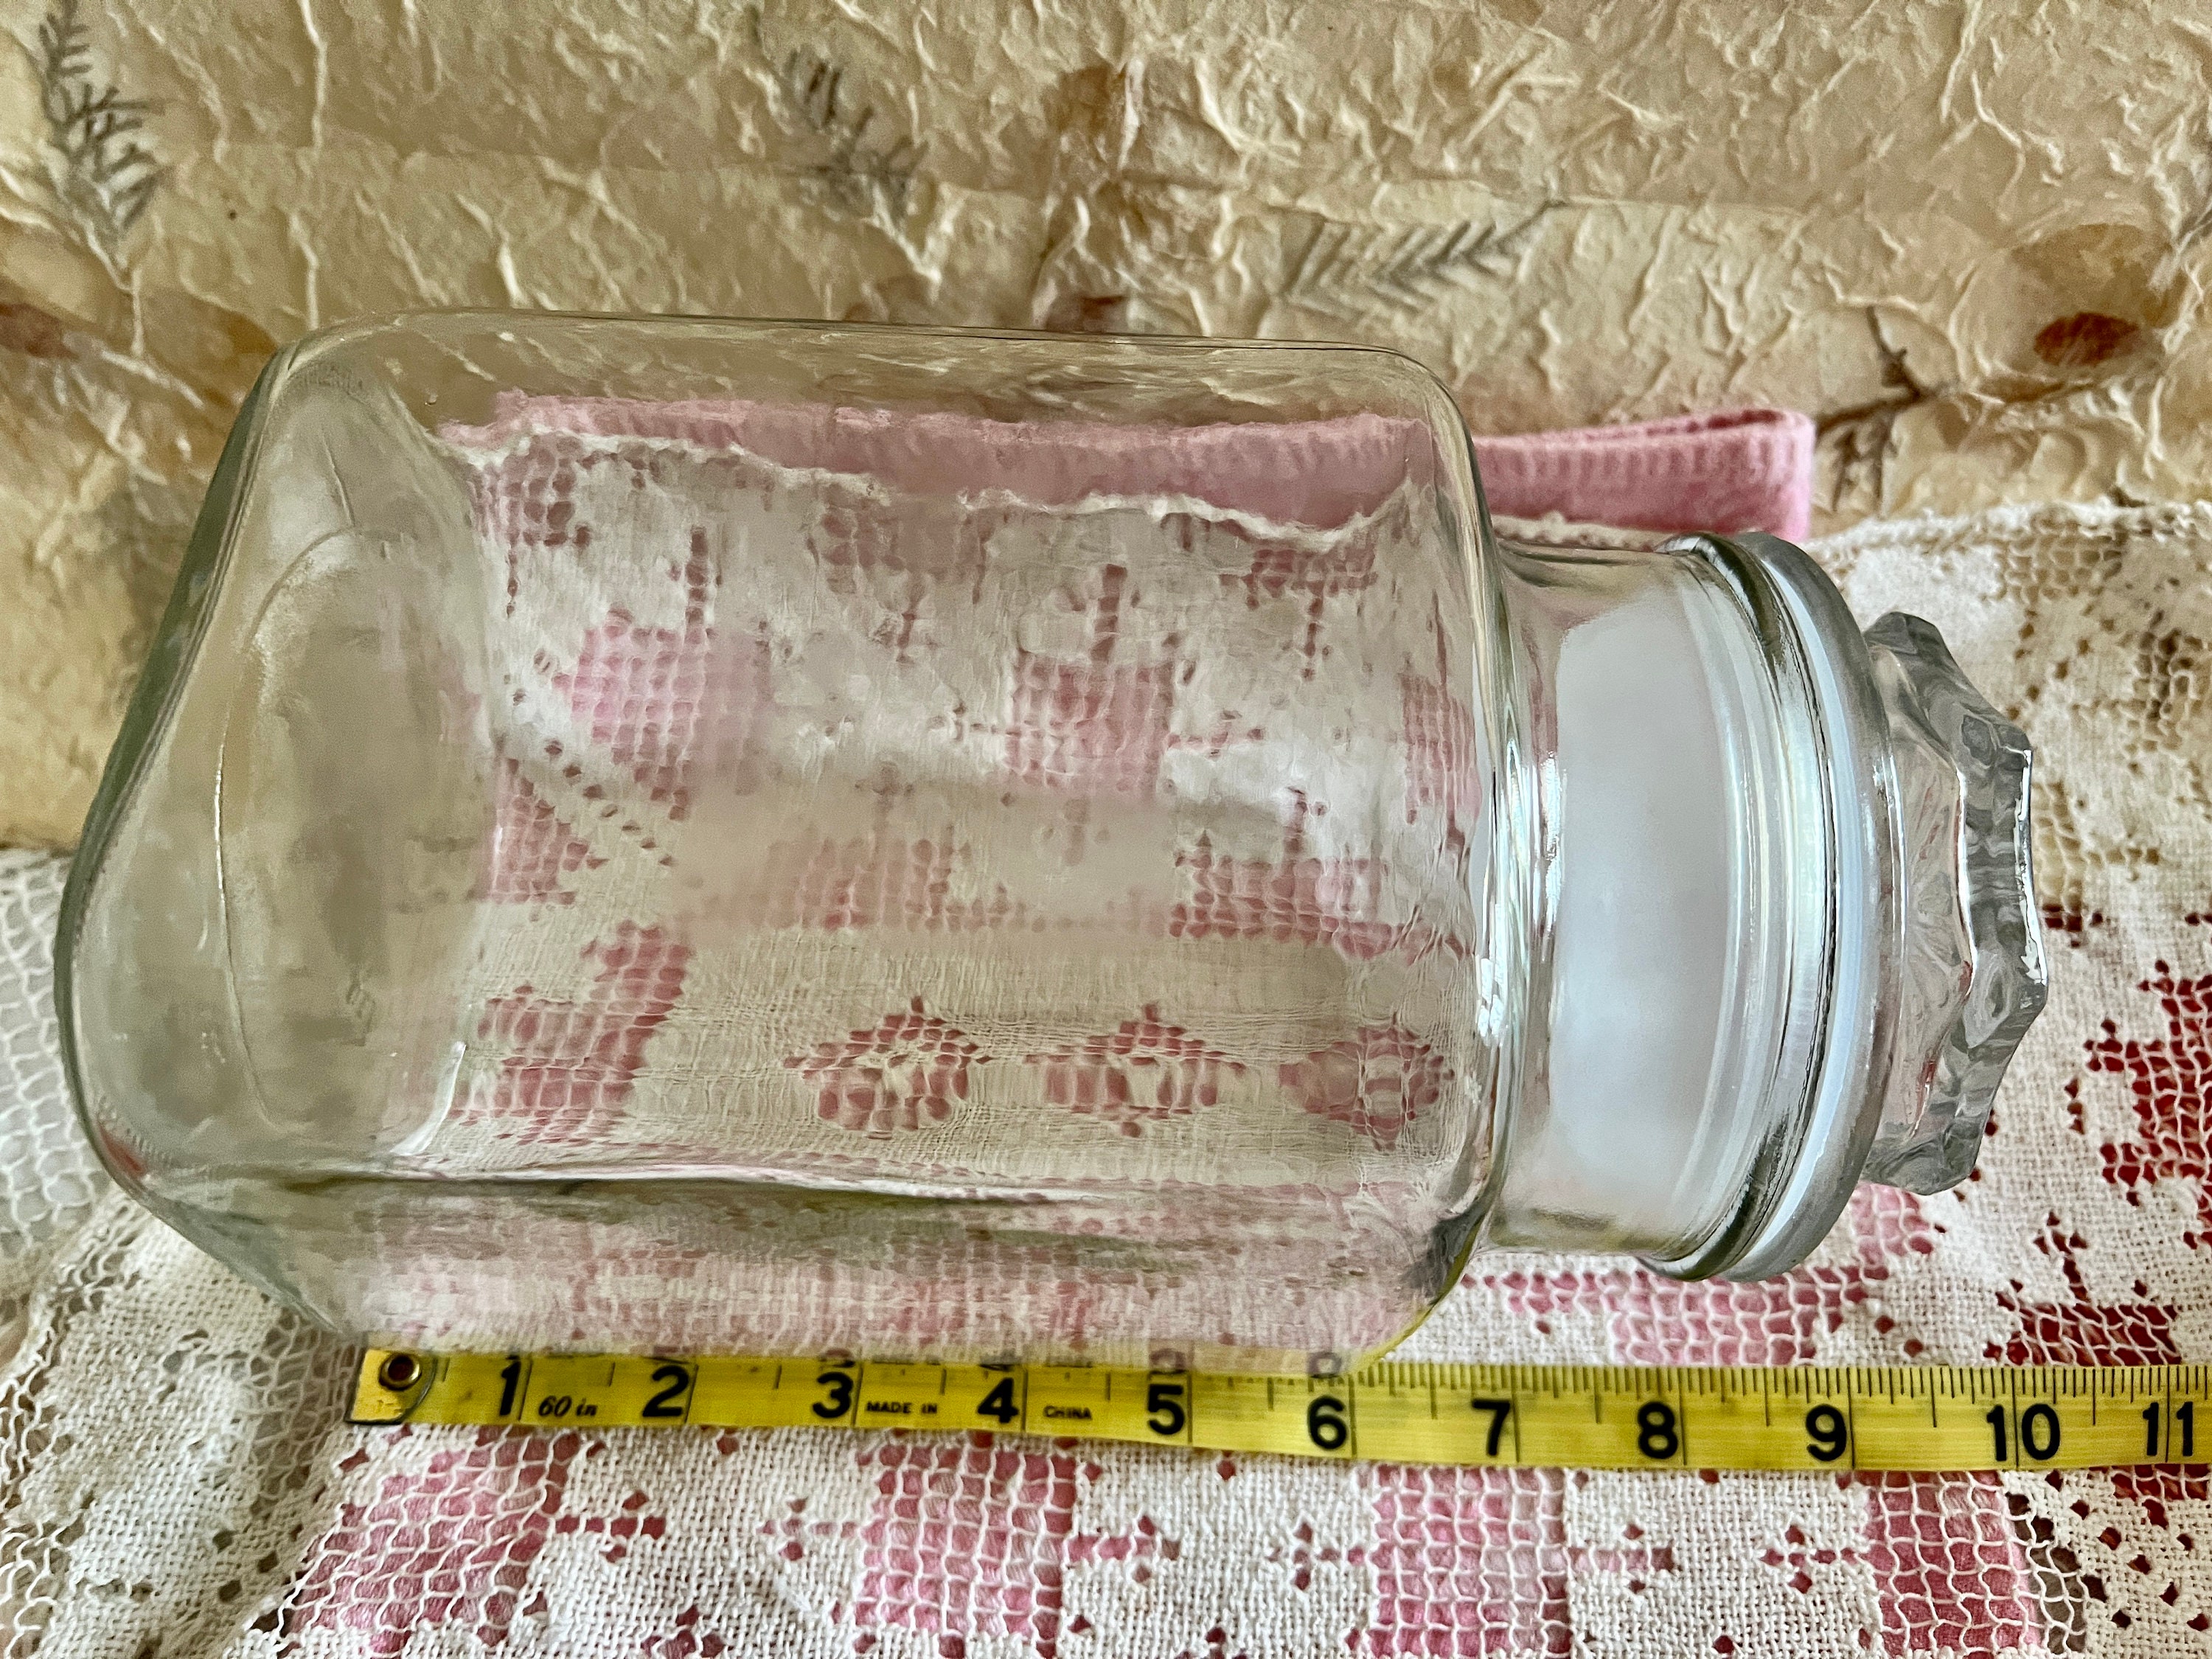 Choose From 3 Different Vintage Large Tall Clear Glass Canister Storage  Apothecary Jar Flour Sugar Tea Cookies Herbs Spices Candy Potpourris 